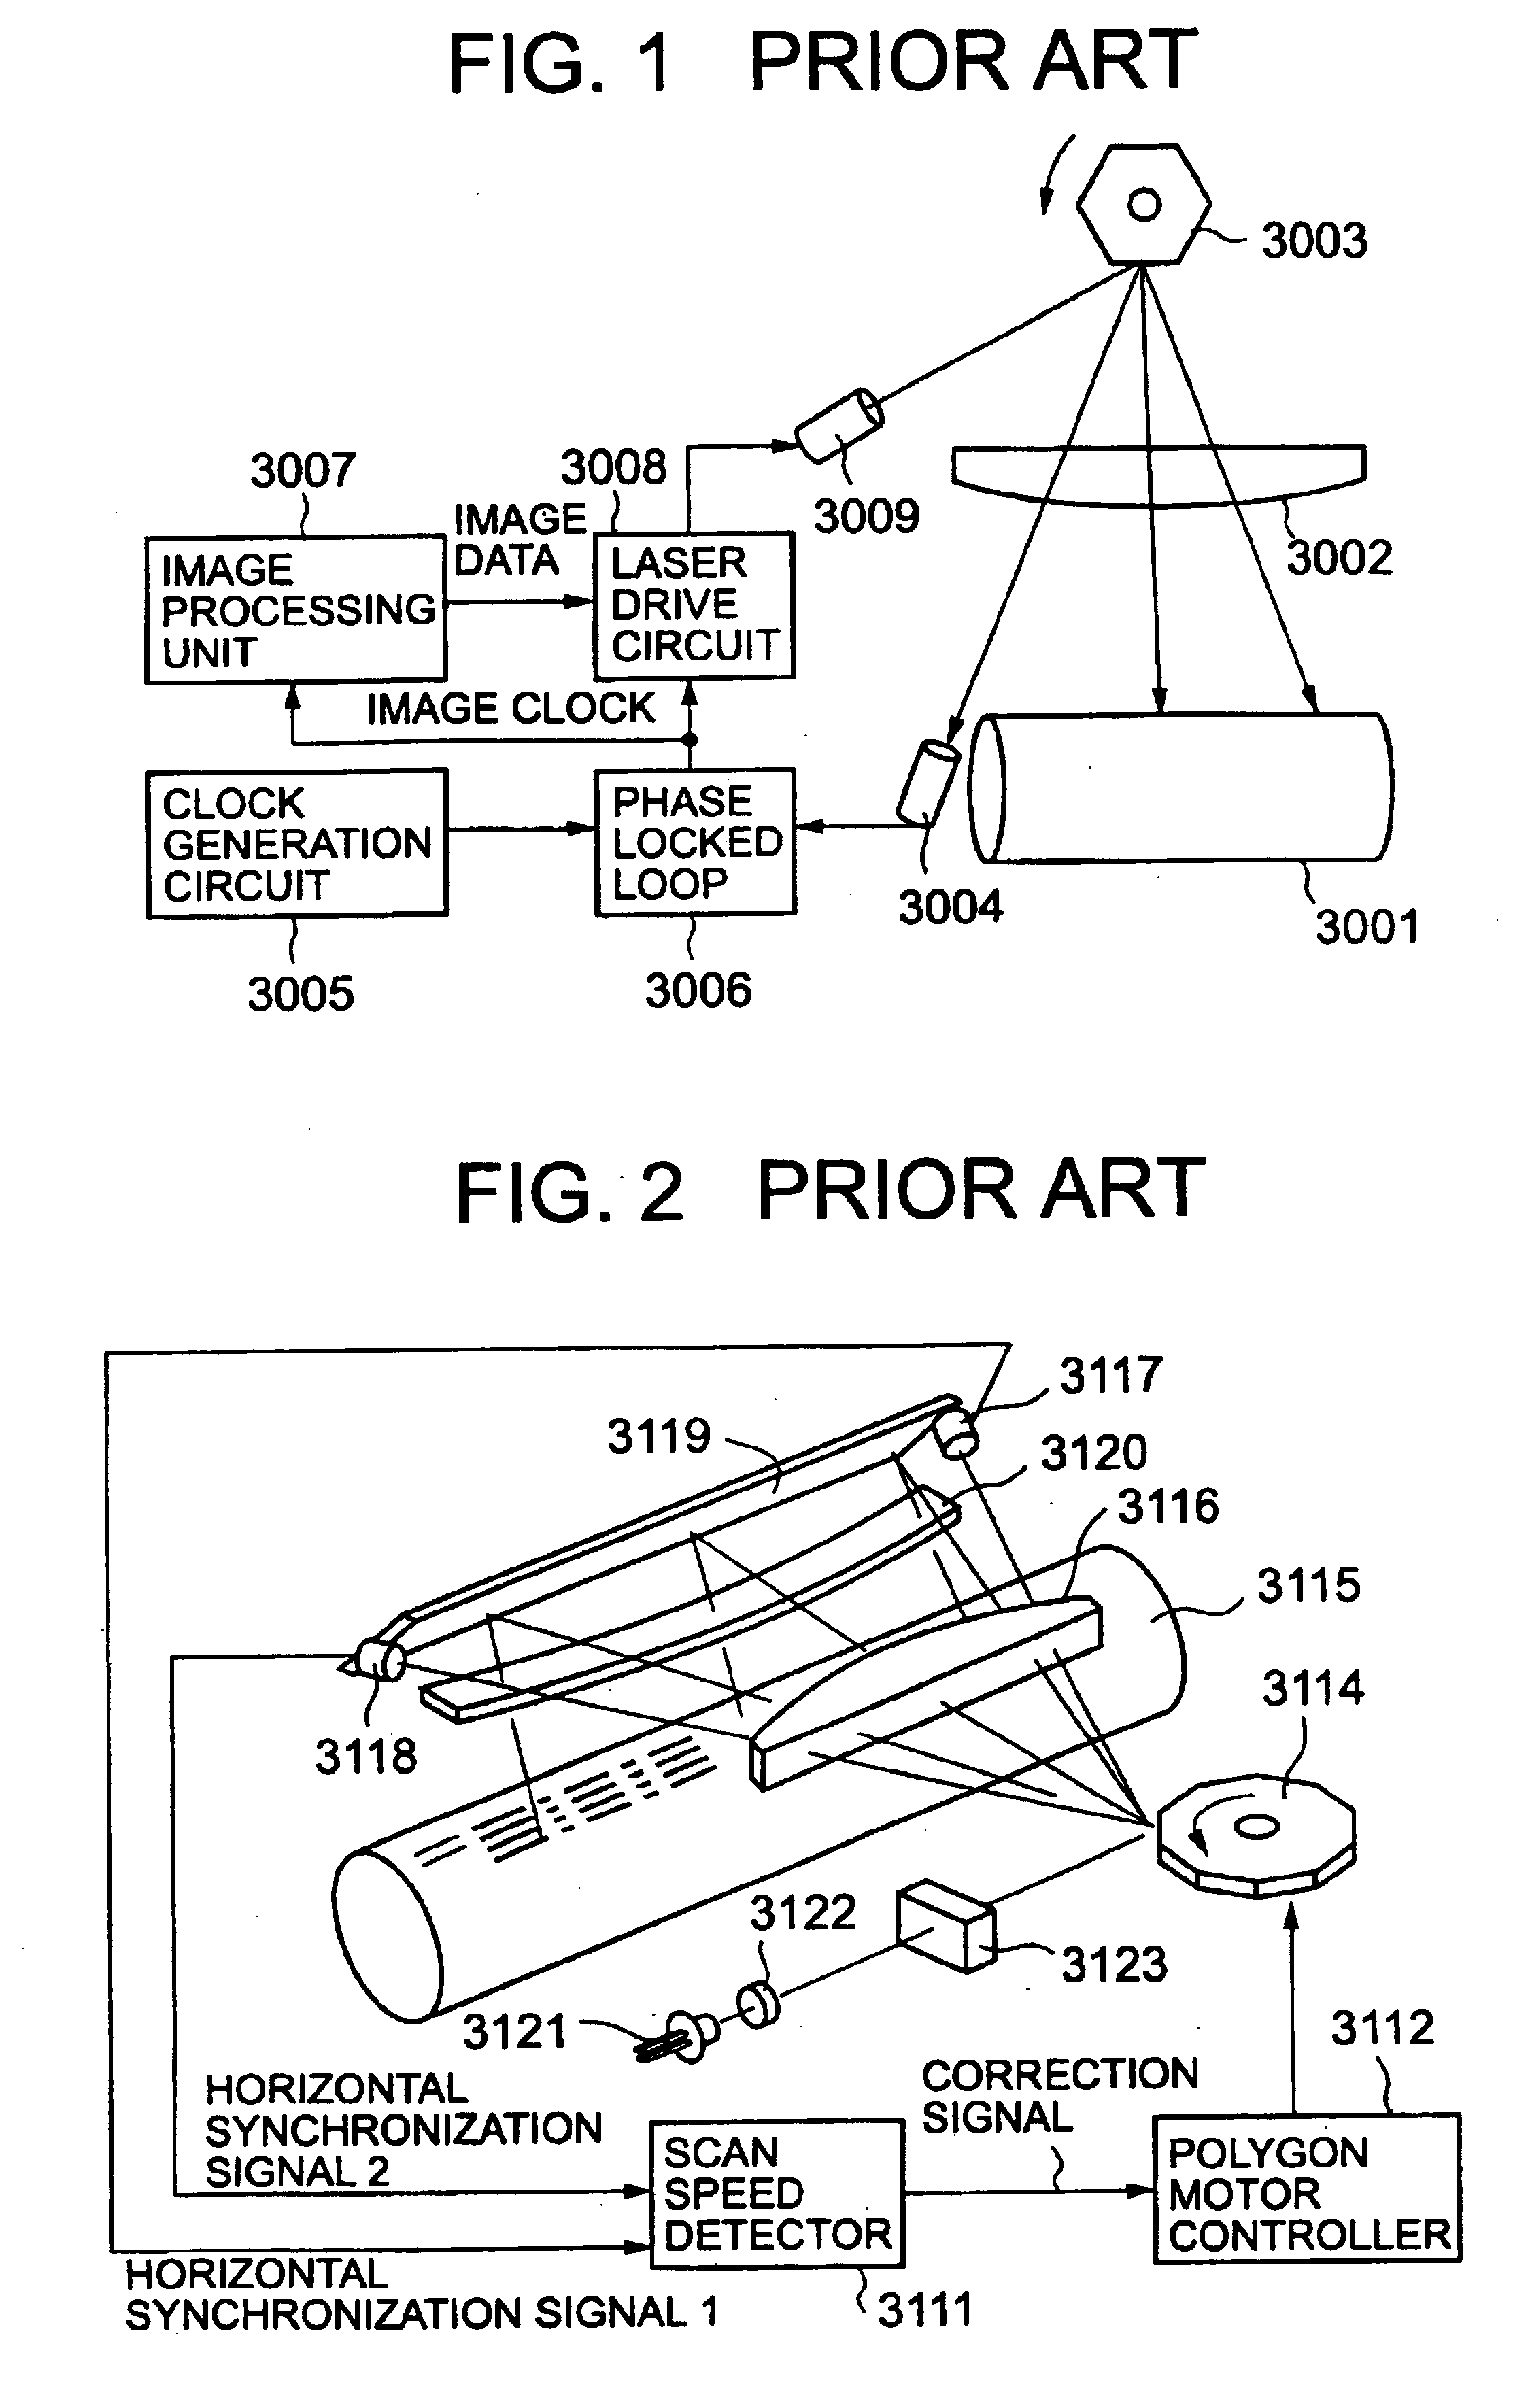 Pixel clock generation apparatus, pixel clock generation method, and image forming apparatus capable of correcting main scan dot position shift with a high degree of accuracy